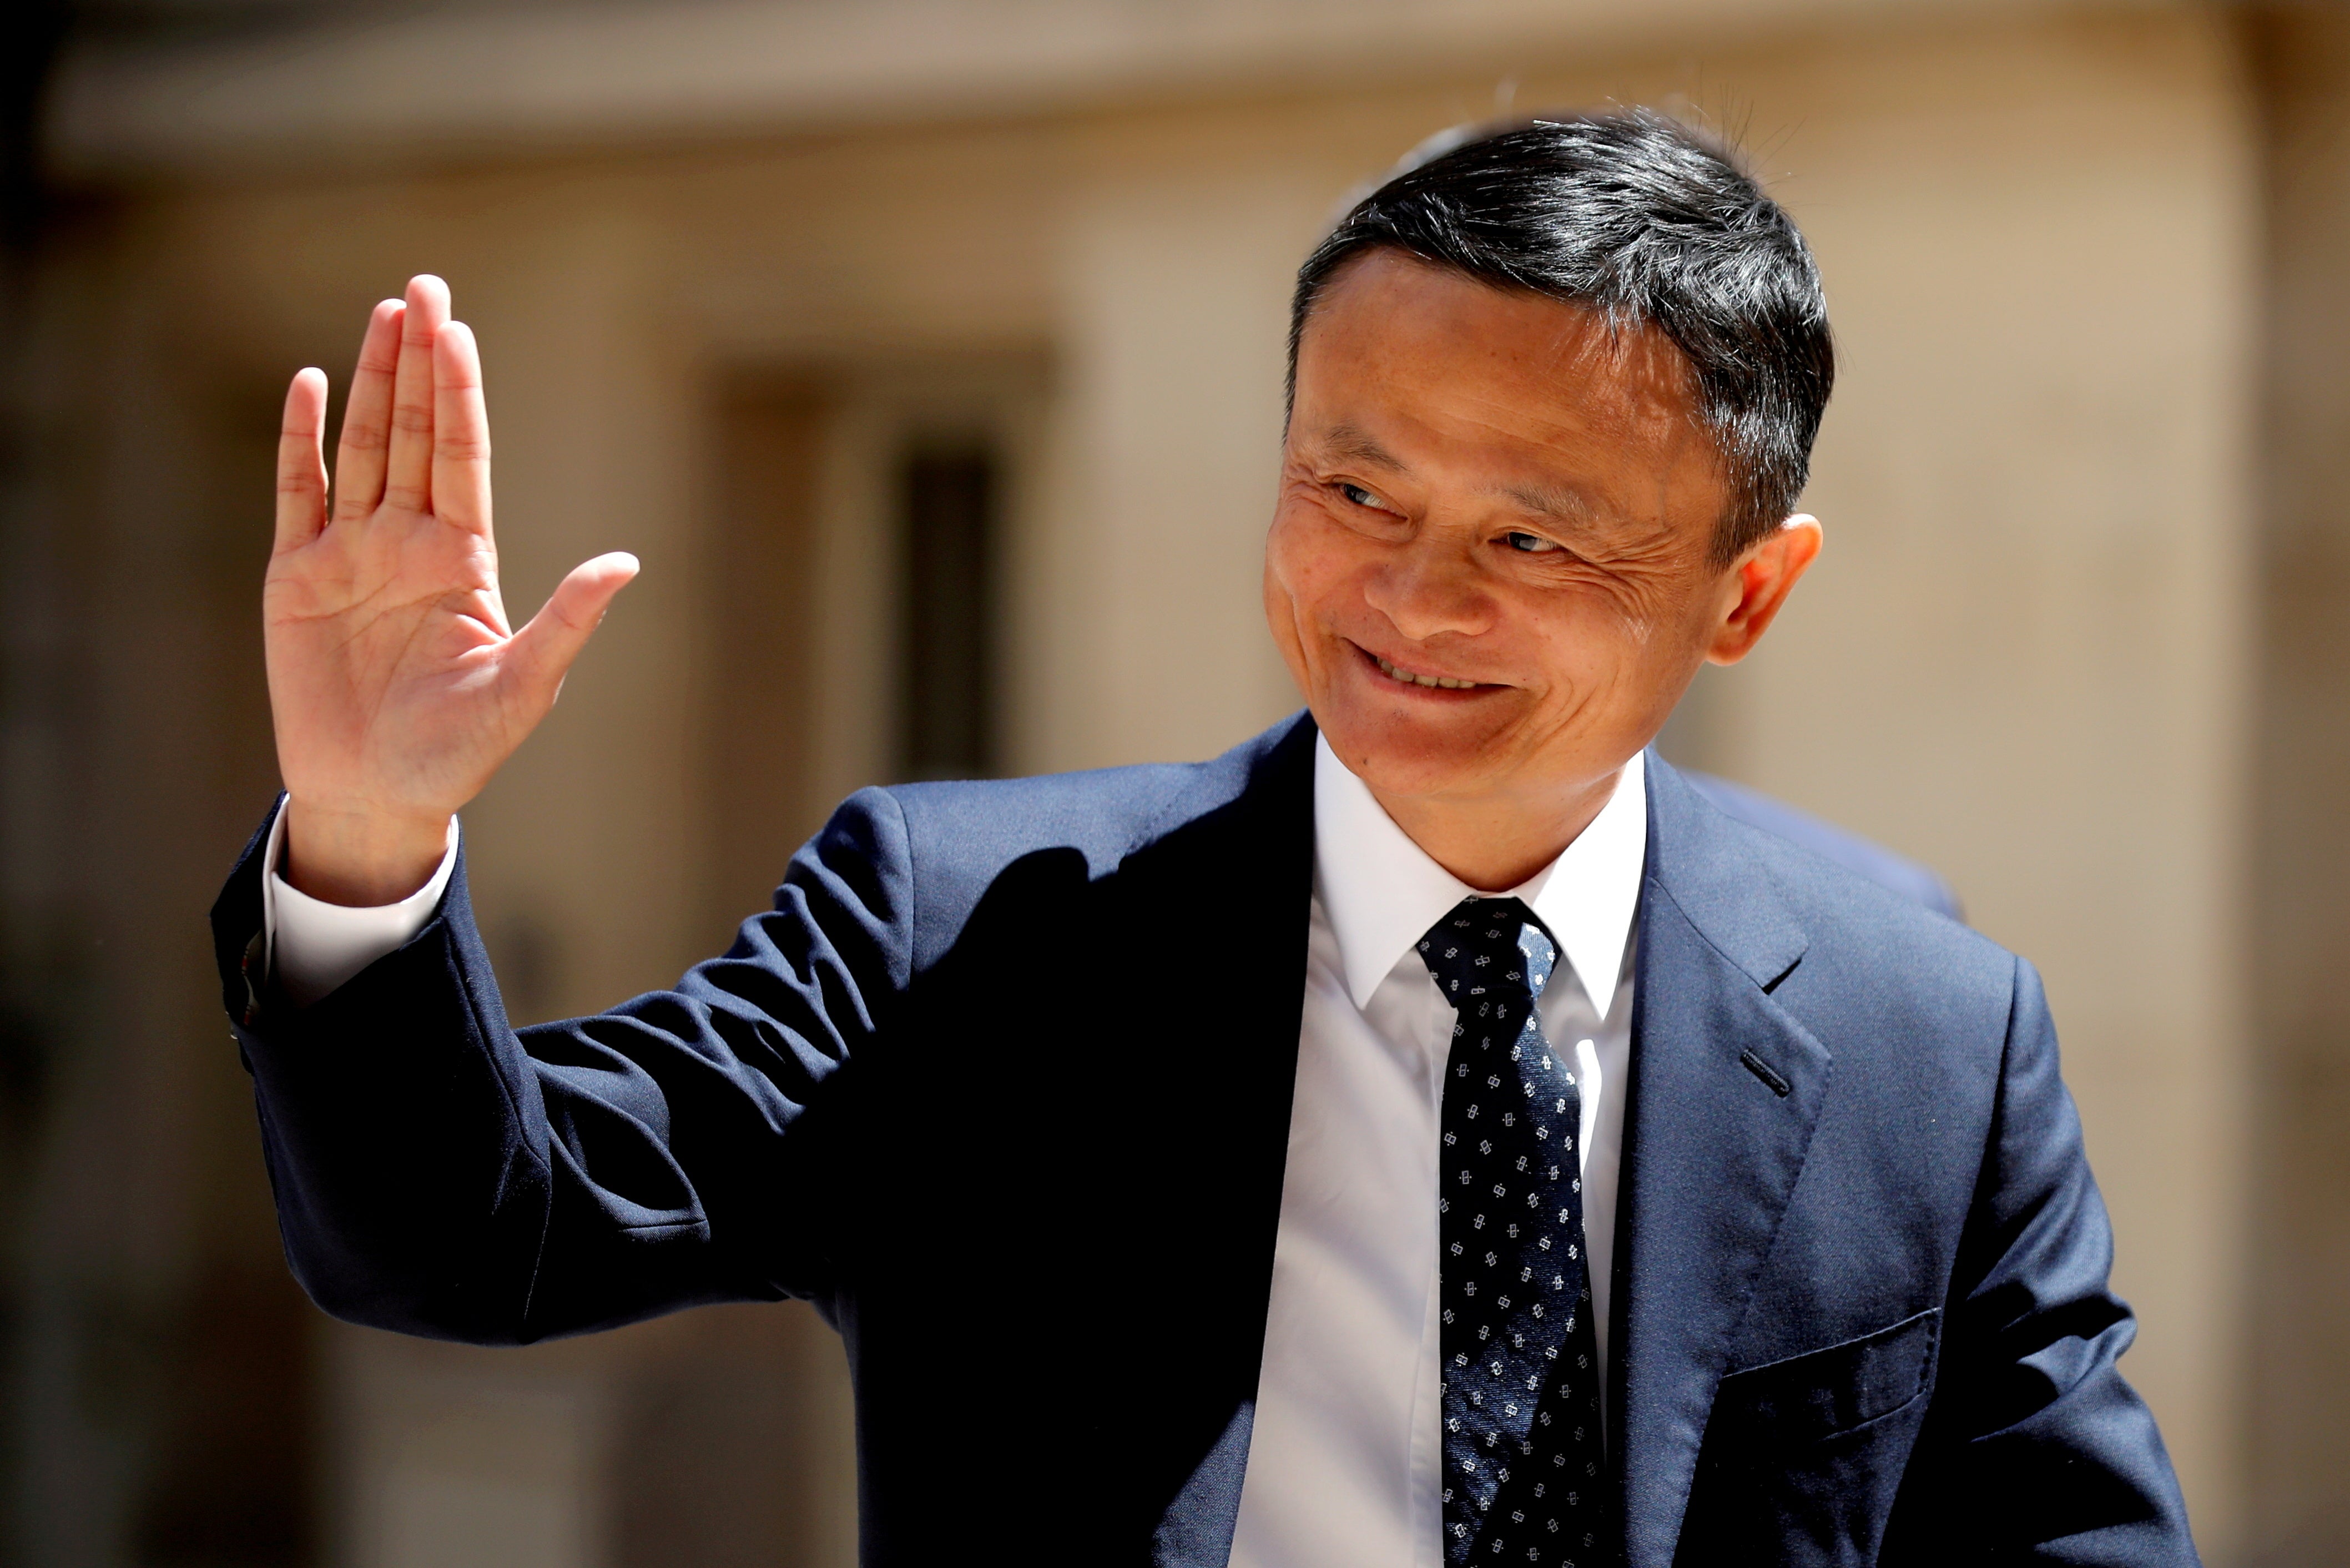 File image: Jack Ma, billionaire founder of Alibaba Group, arrives at the ‘Tech for Good’ summit in Paris in May 2019